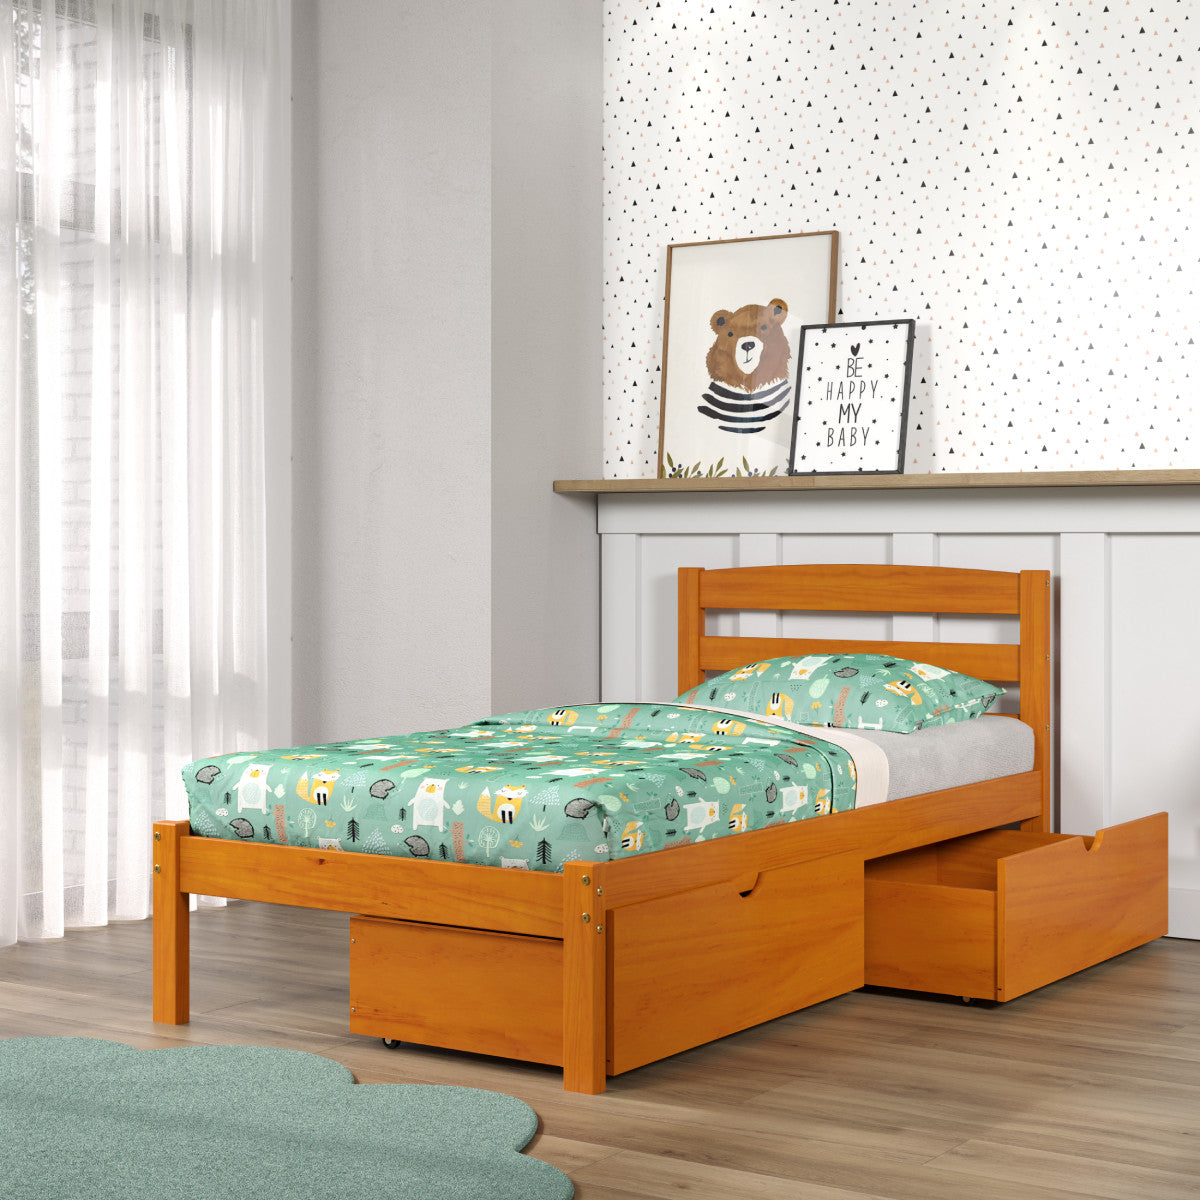 TWIN ECONO BED WITH DUAL UNDER BED DRAWERS LIGHT HONEY FINISH